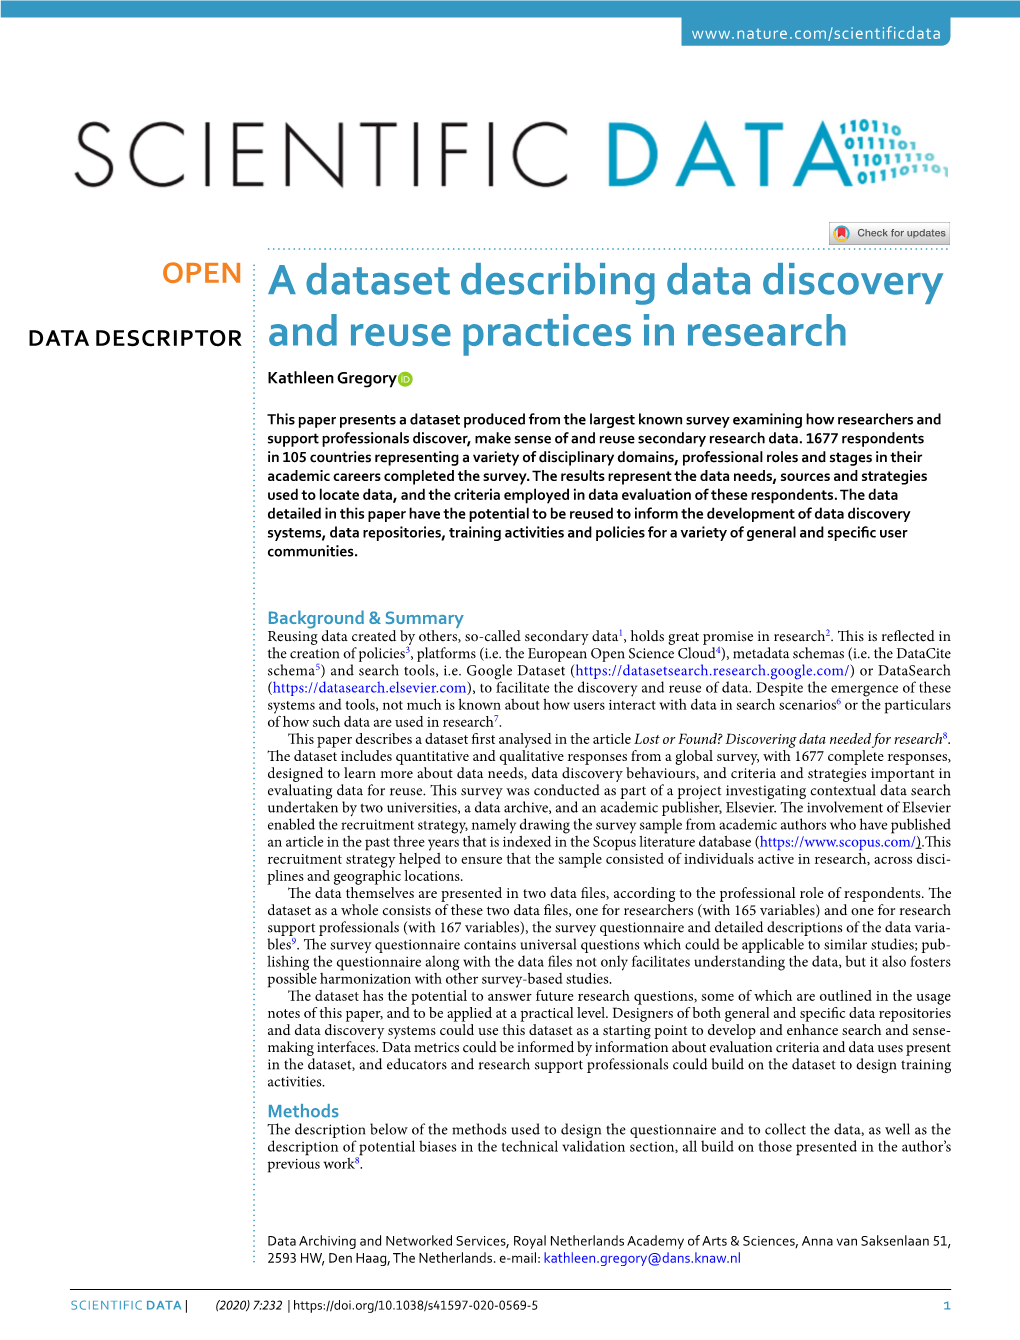 A Dataset Describing Data Discovery and Reuse Practices in Research